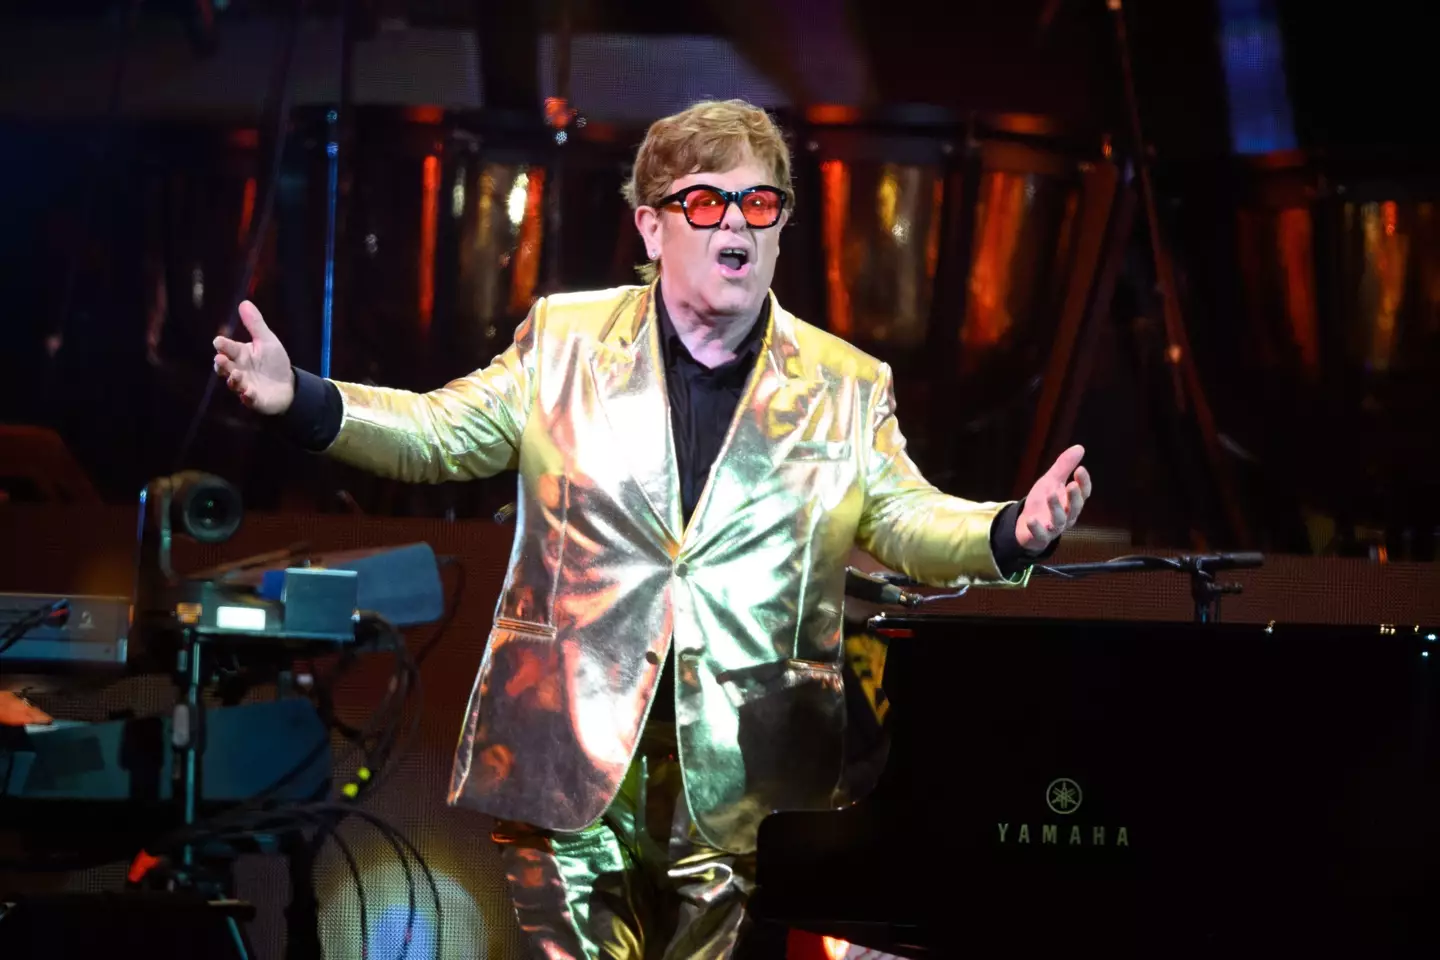 Elton lapped up the applause from the gigantic Glasto crowd.